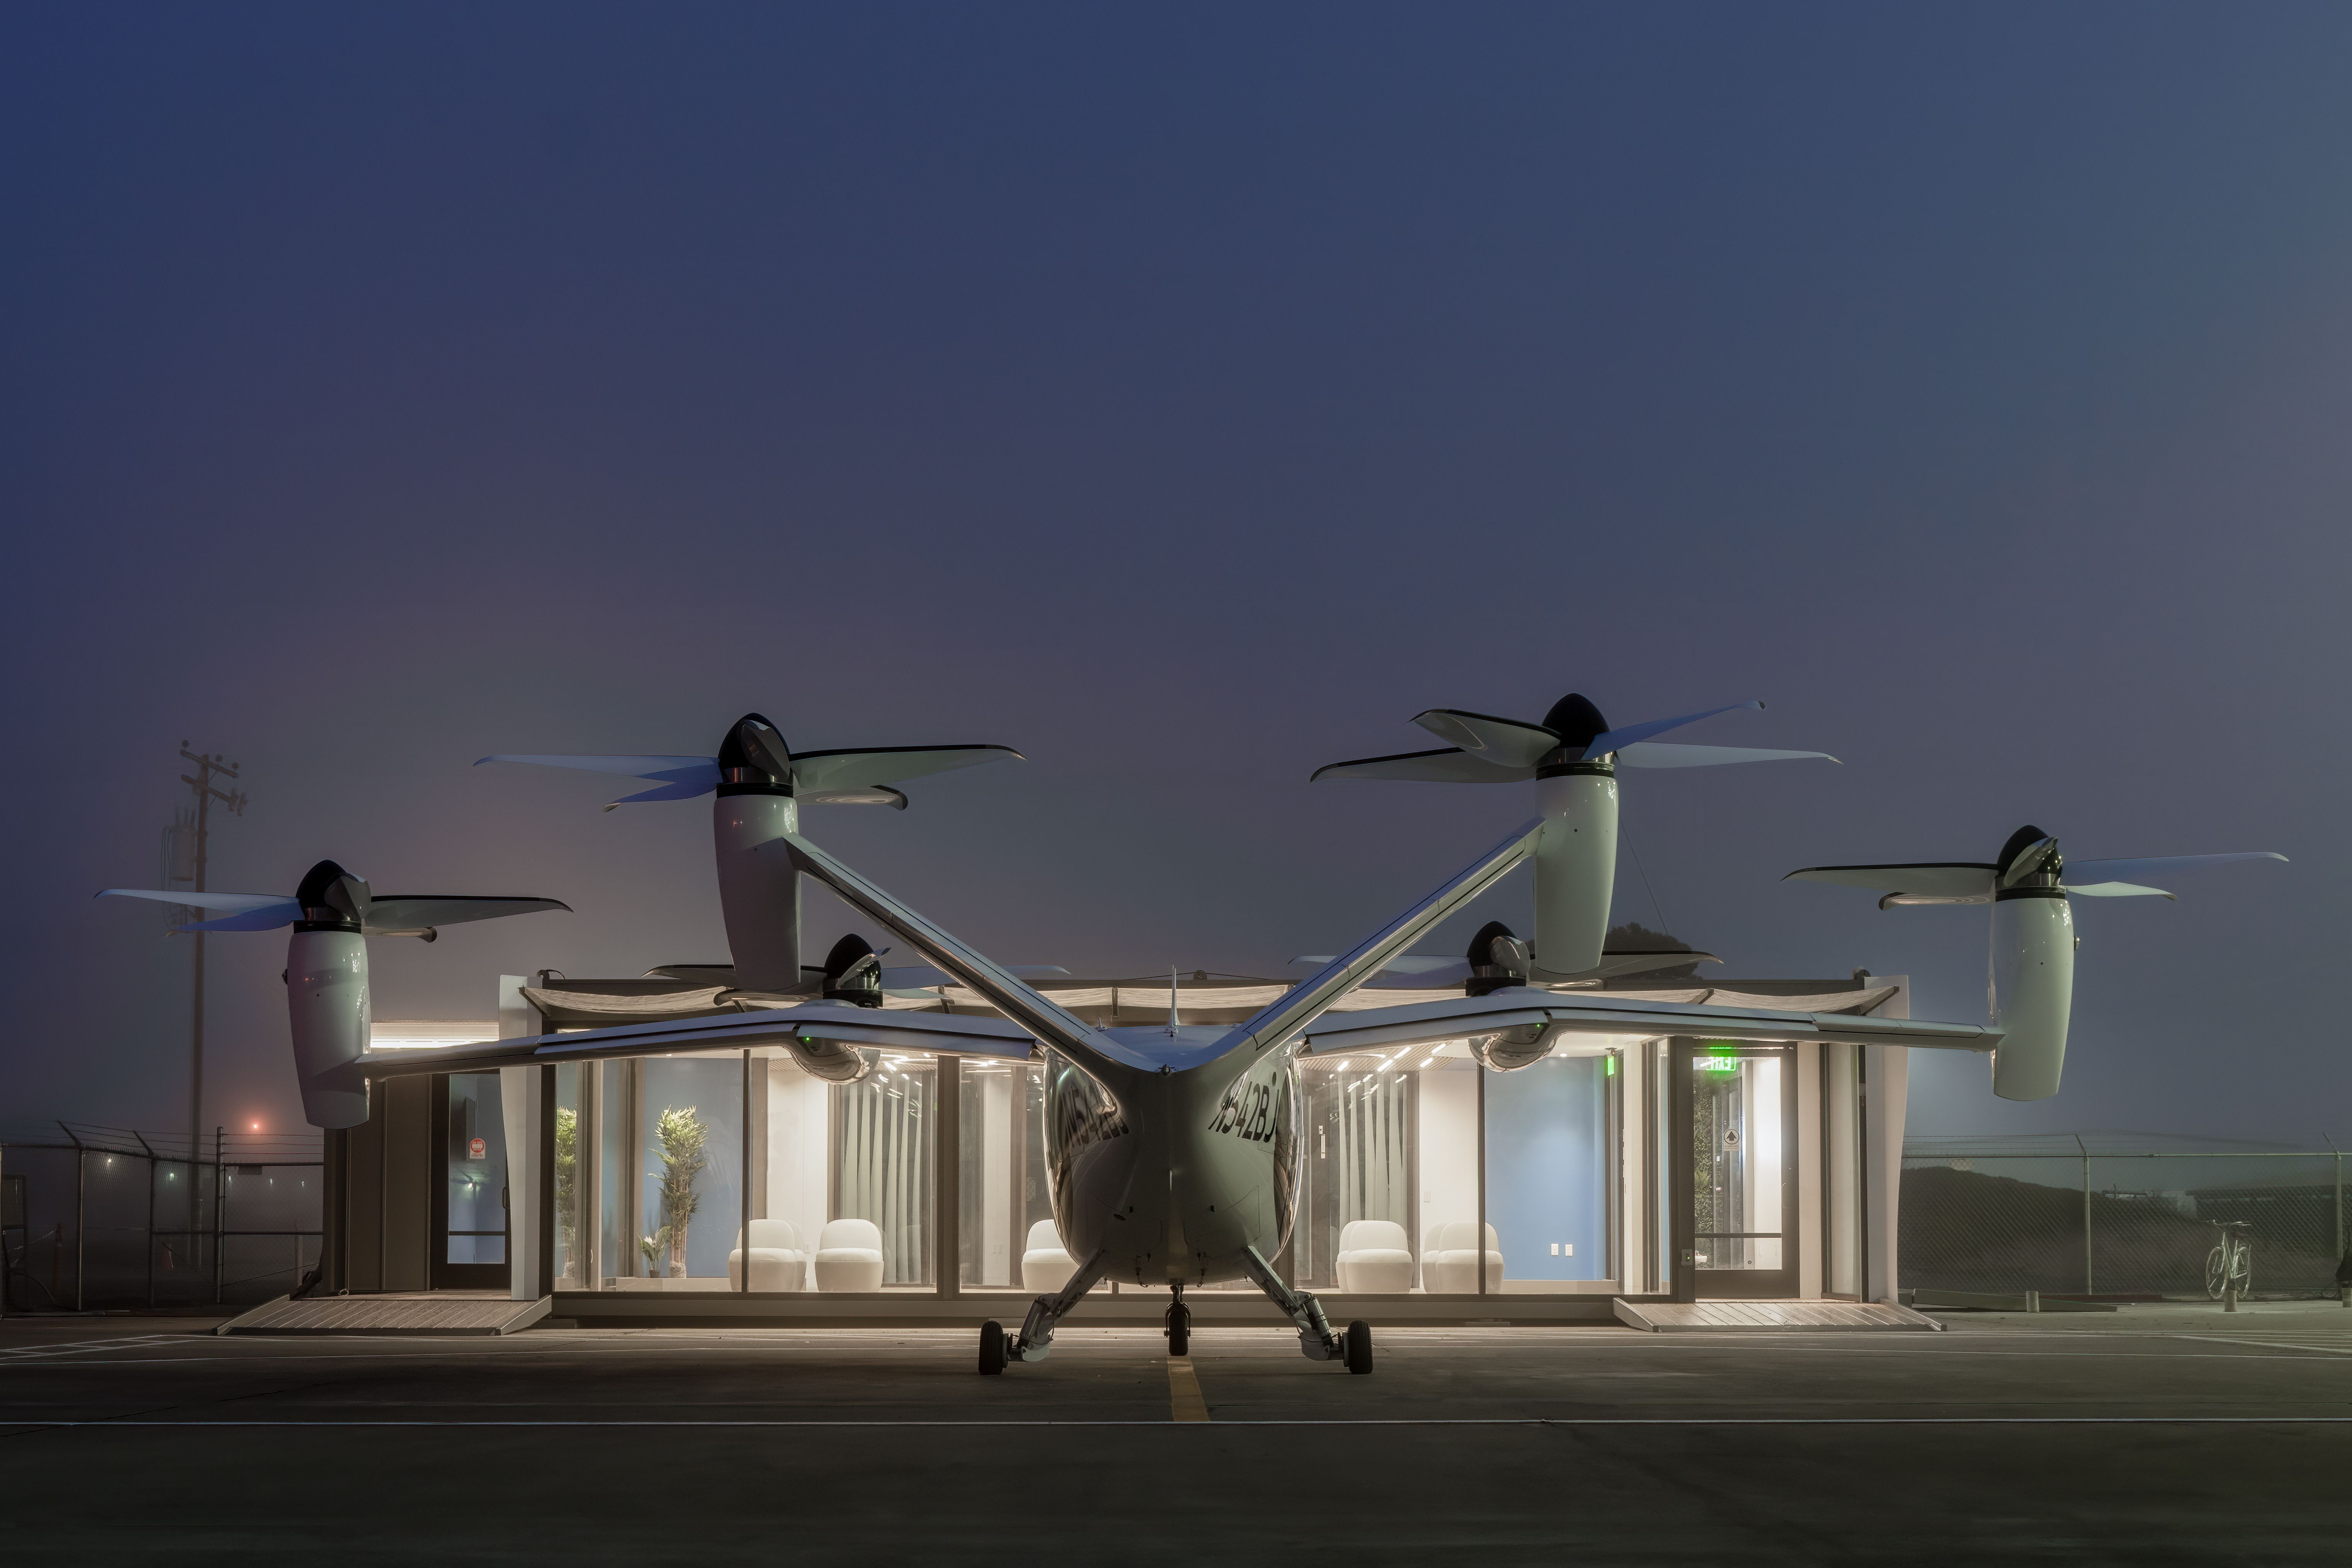 Skyports teams up with Joby to develop a Living Lab vertiport